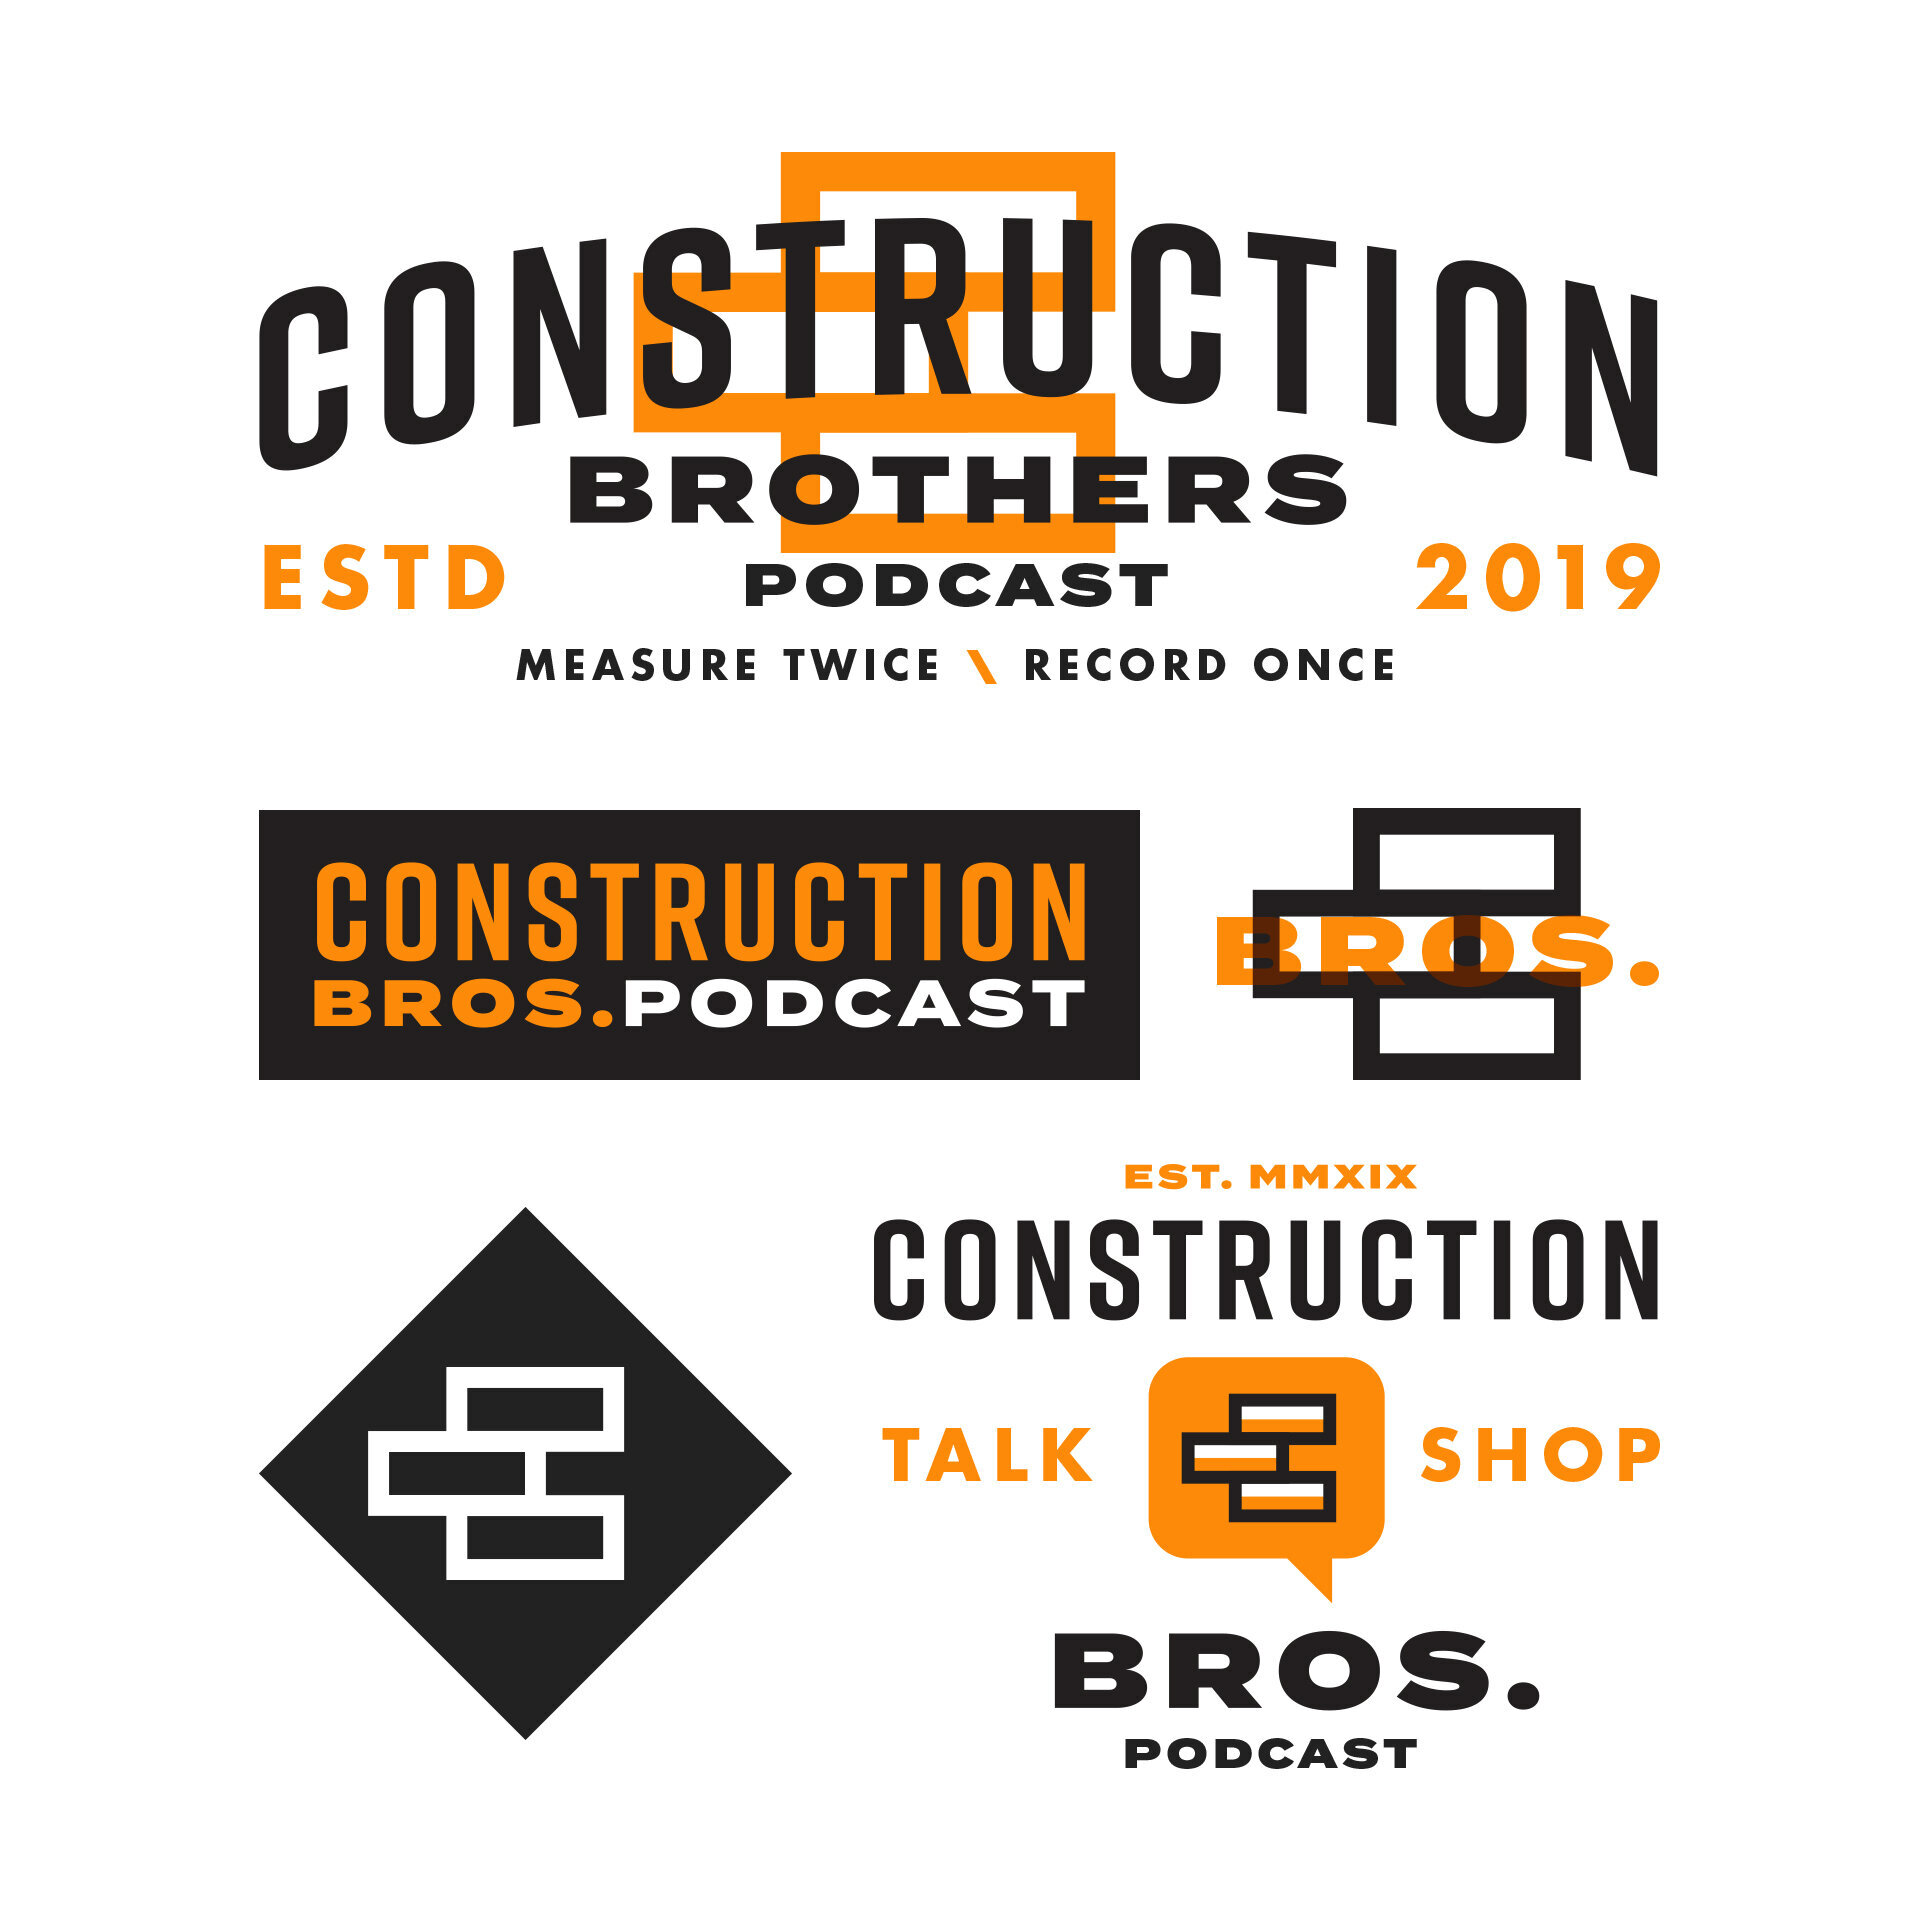   “Construction Bros. Podcast”  Branding   | 2019 | Client Work -  Logos and Branding  